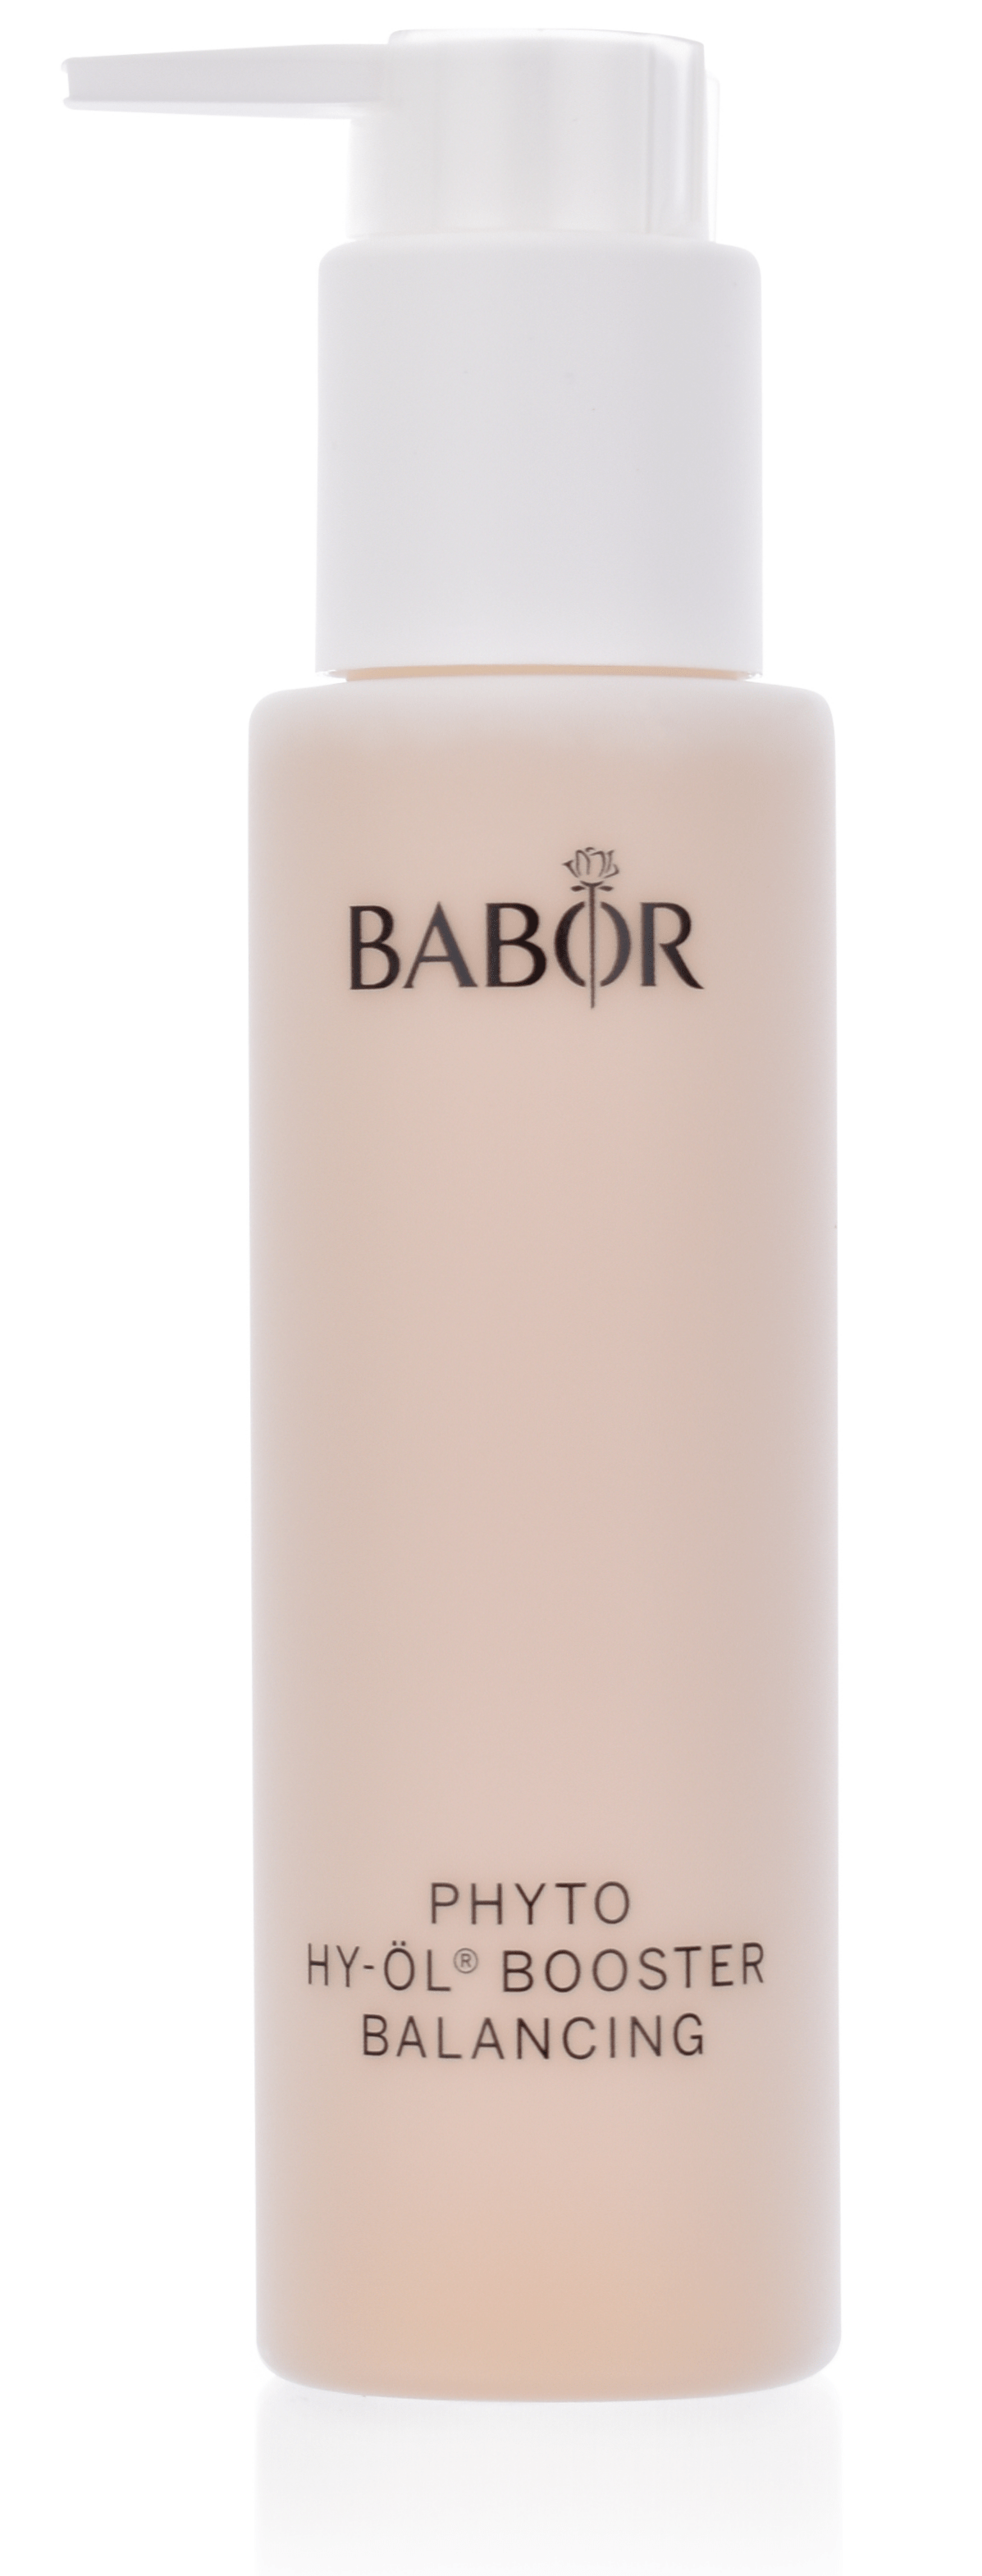 BABOR Cleansing - Phyto HY-ÖL Booster Balancing 100 ml